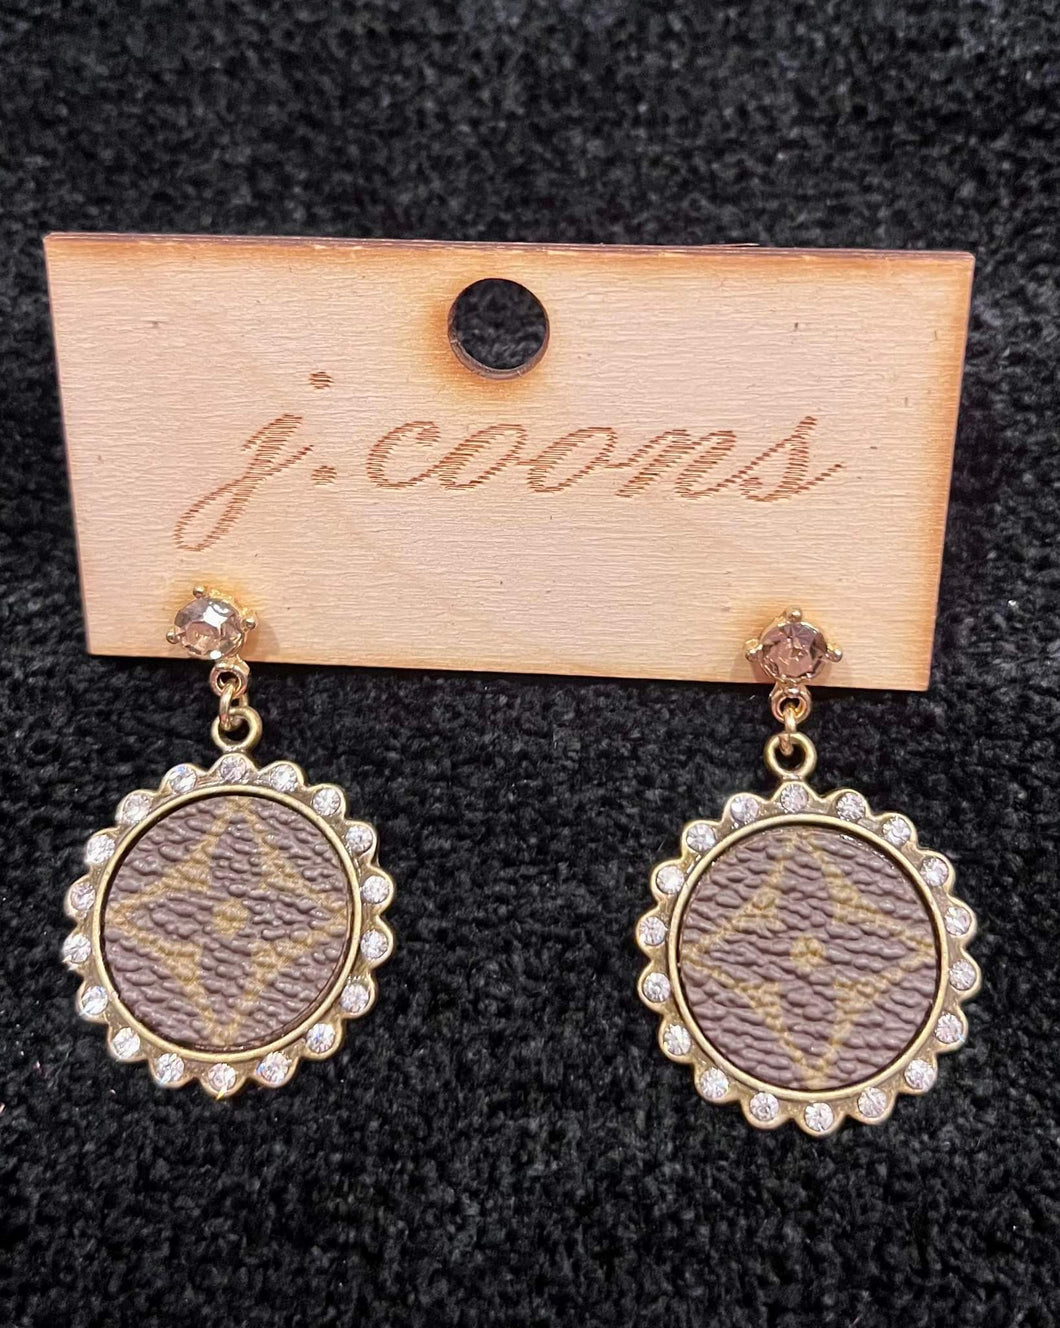 Earrings Hand Made by J. Coons